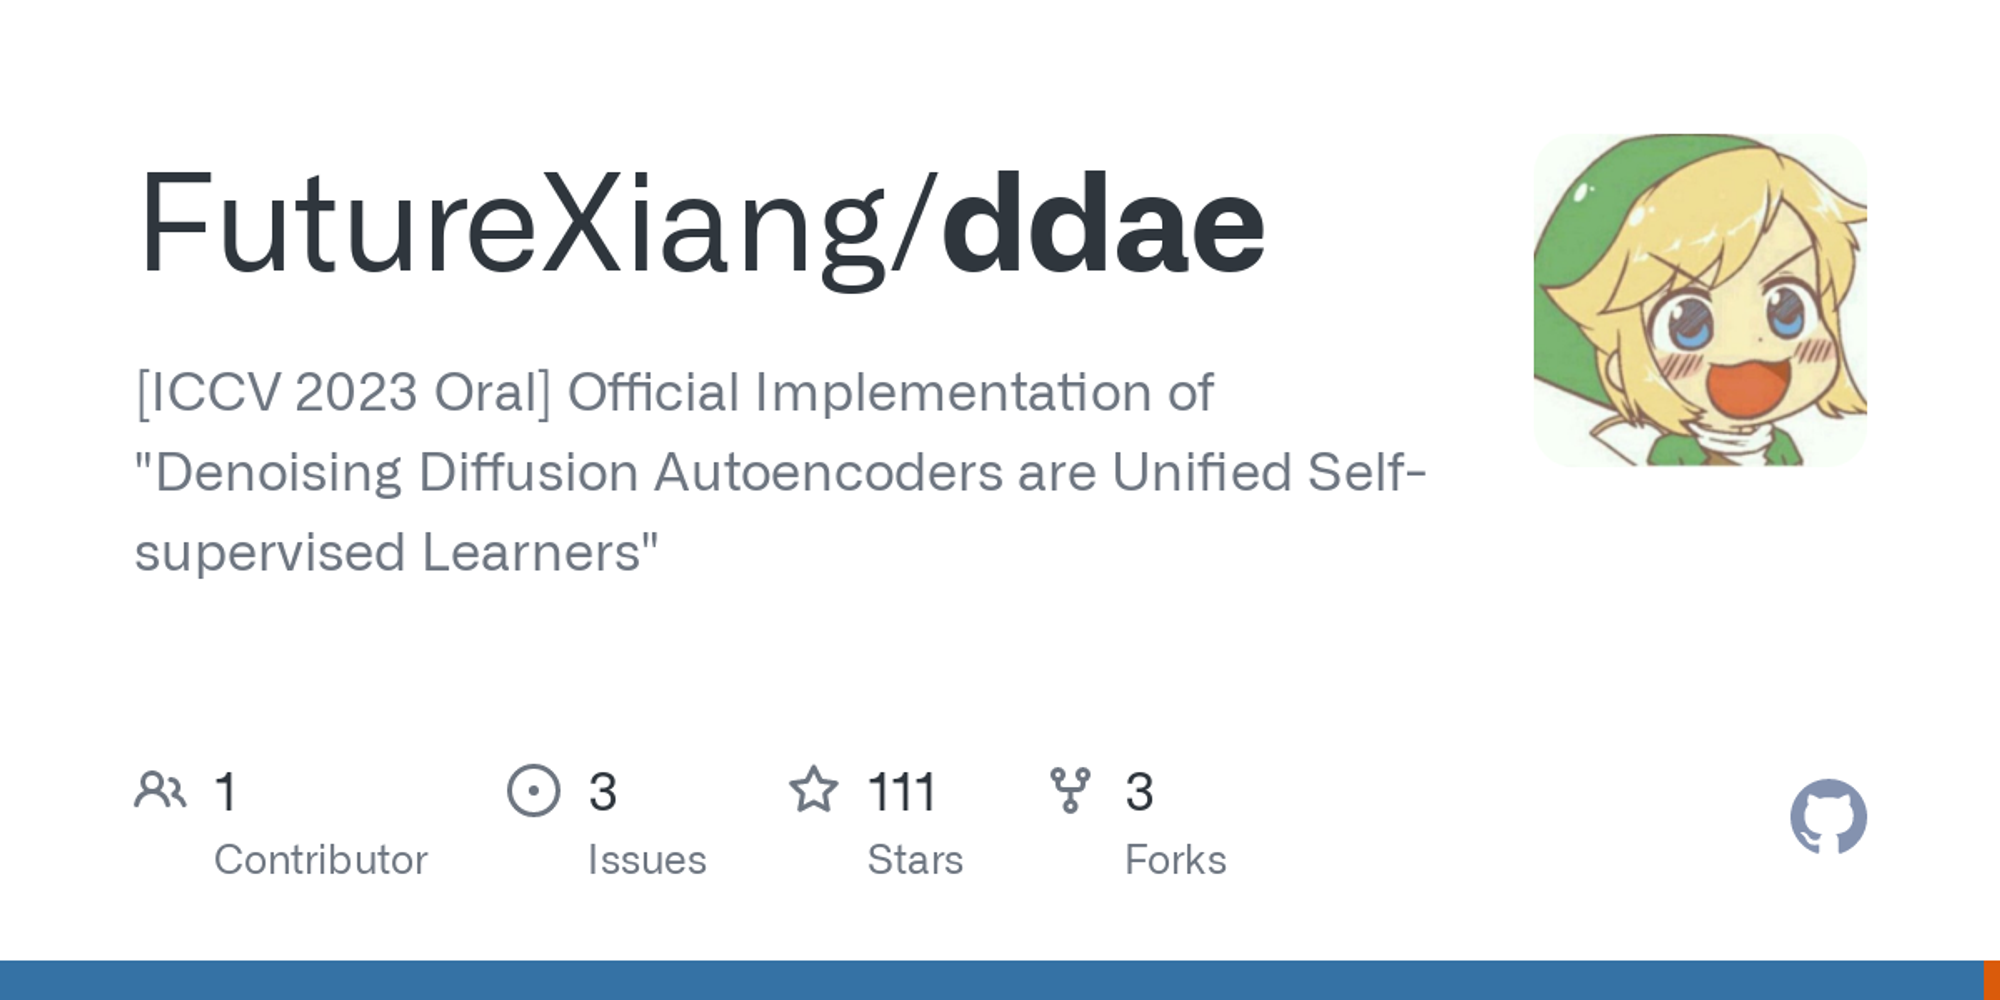 GitHub - FutureXiang/ddae: [ICCV 2023 Oral] Official Implementation of "Denoising Diffusion Autoencoders are Unified Self-supervised Learners"